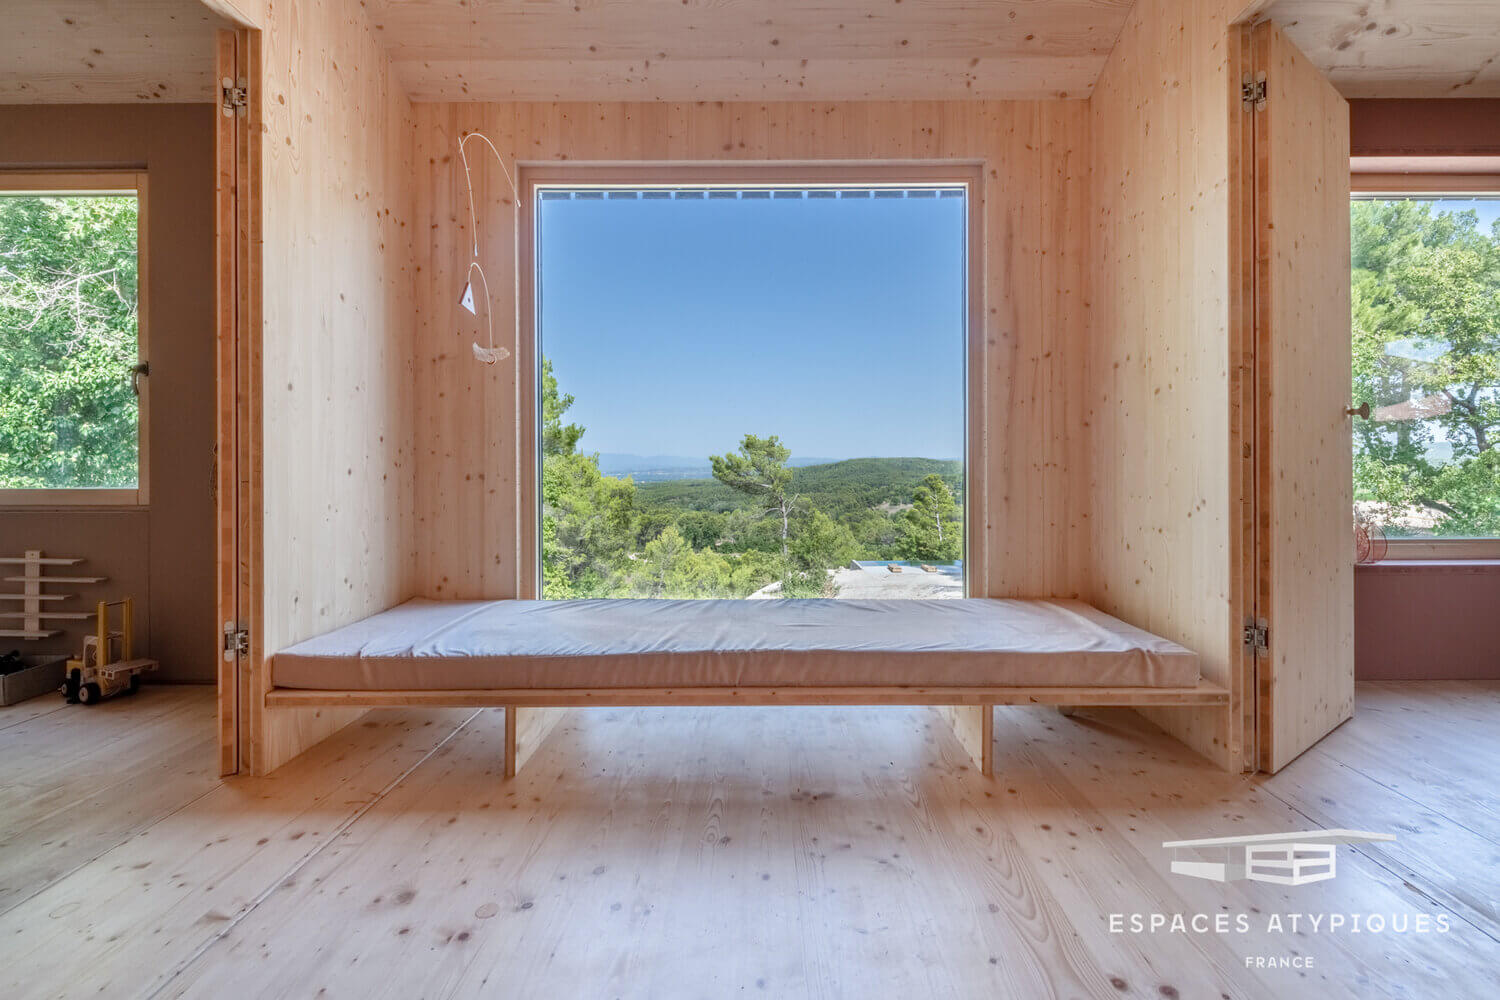 AMinimalisticWoodenHomewithAmazingViewsovertheProvenceCountryside TheNordroom5 A Minimalistic Wooden Home Overlooking the Provence Countryside